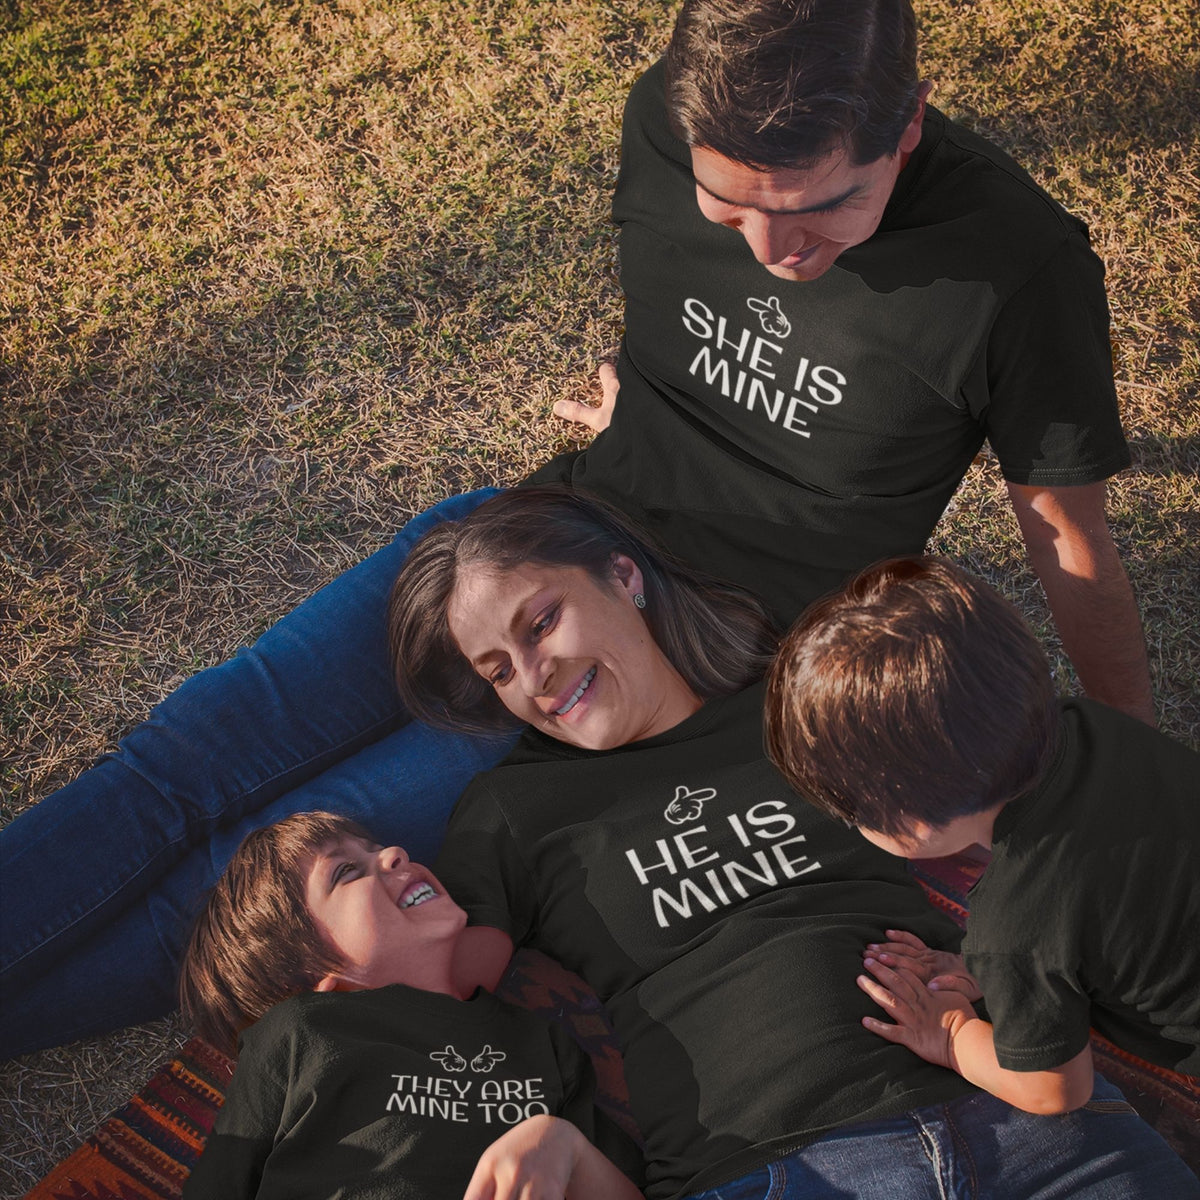 he-is-mine-matching-family-black-t-shirts-for-mom-dad-son-daughter-gogirgit-com